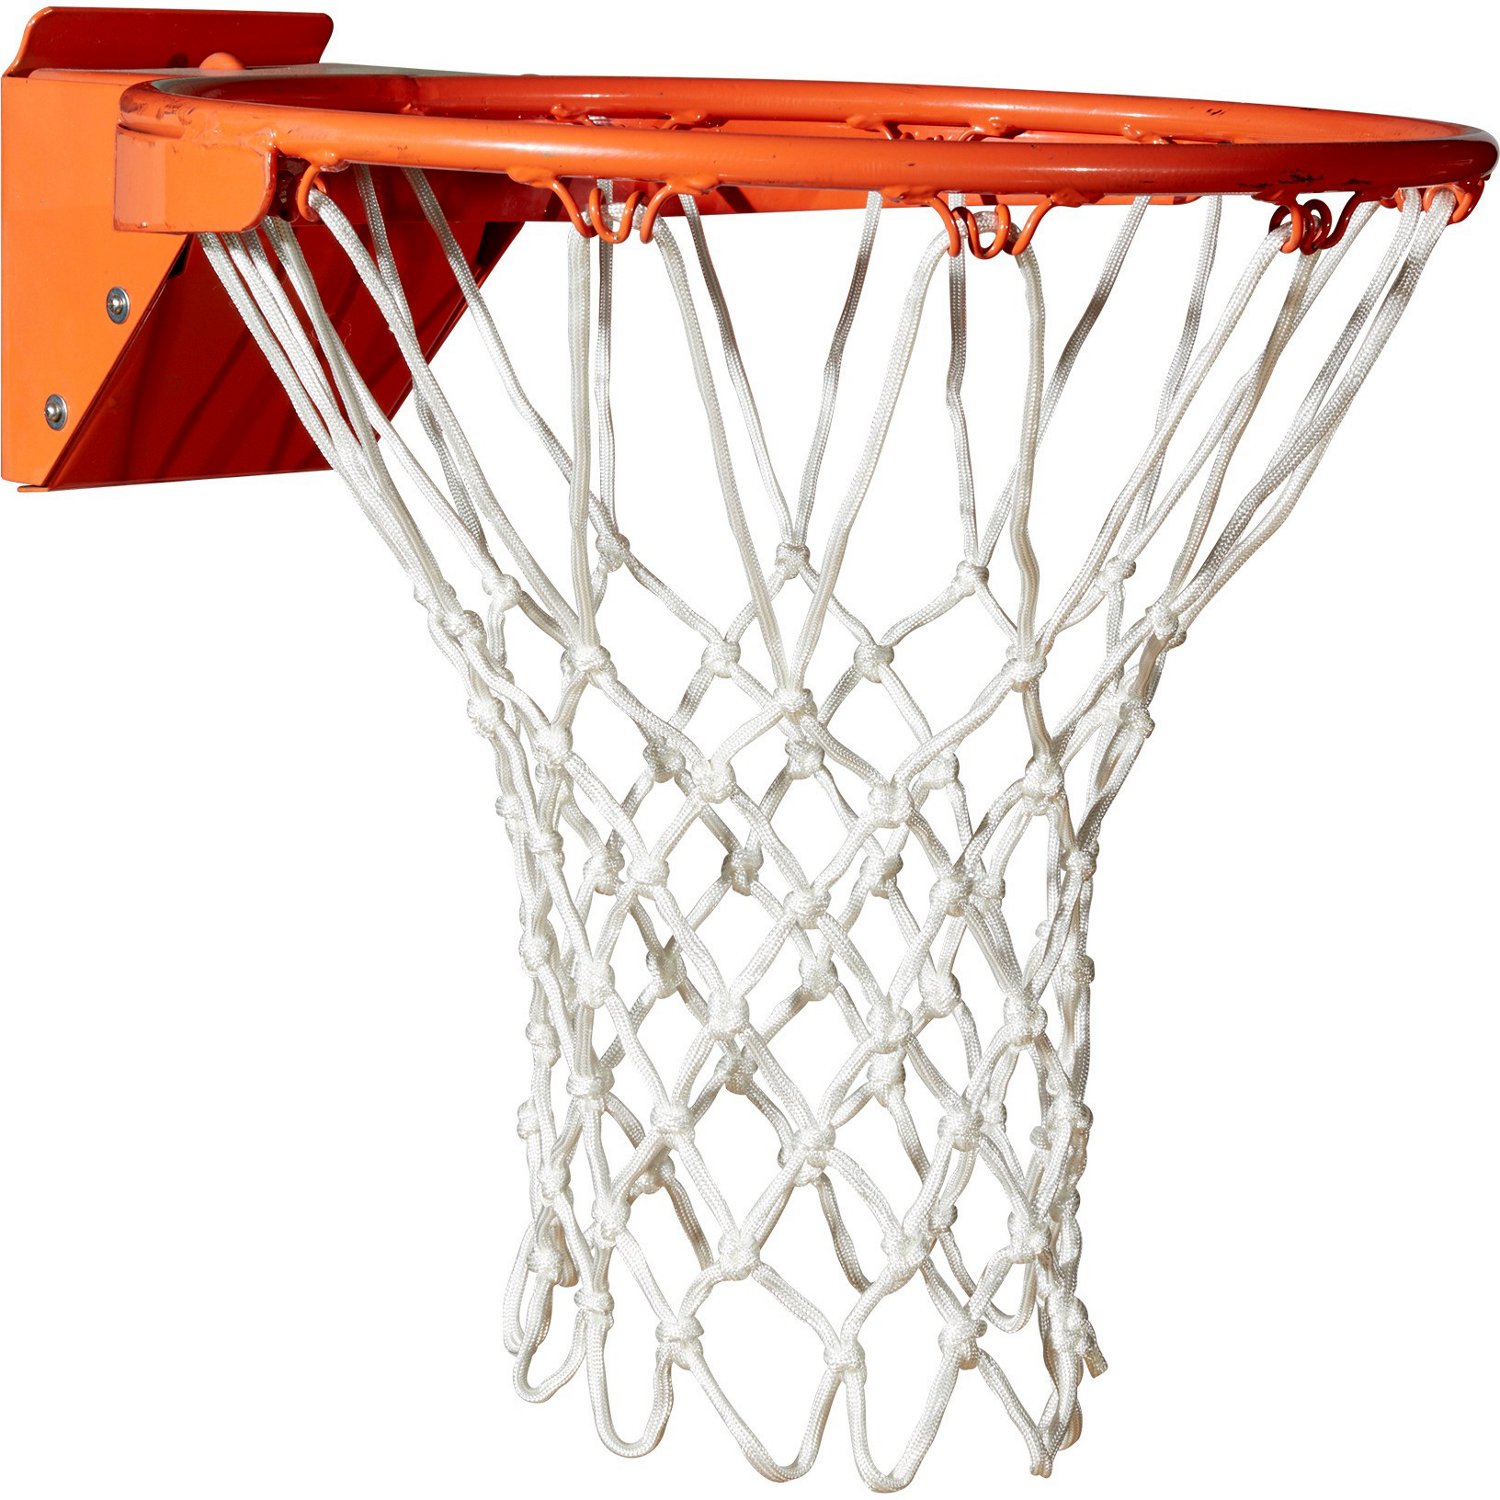 Wilson NBA Authentic Performance Basketball Net                                                                                  - view number 1 selected